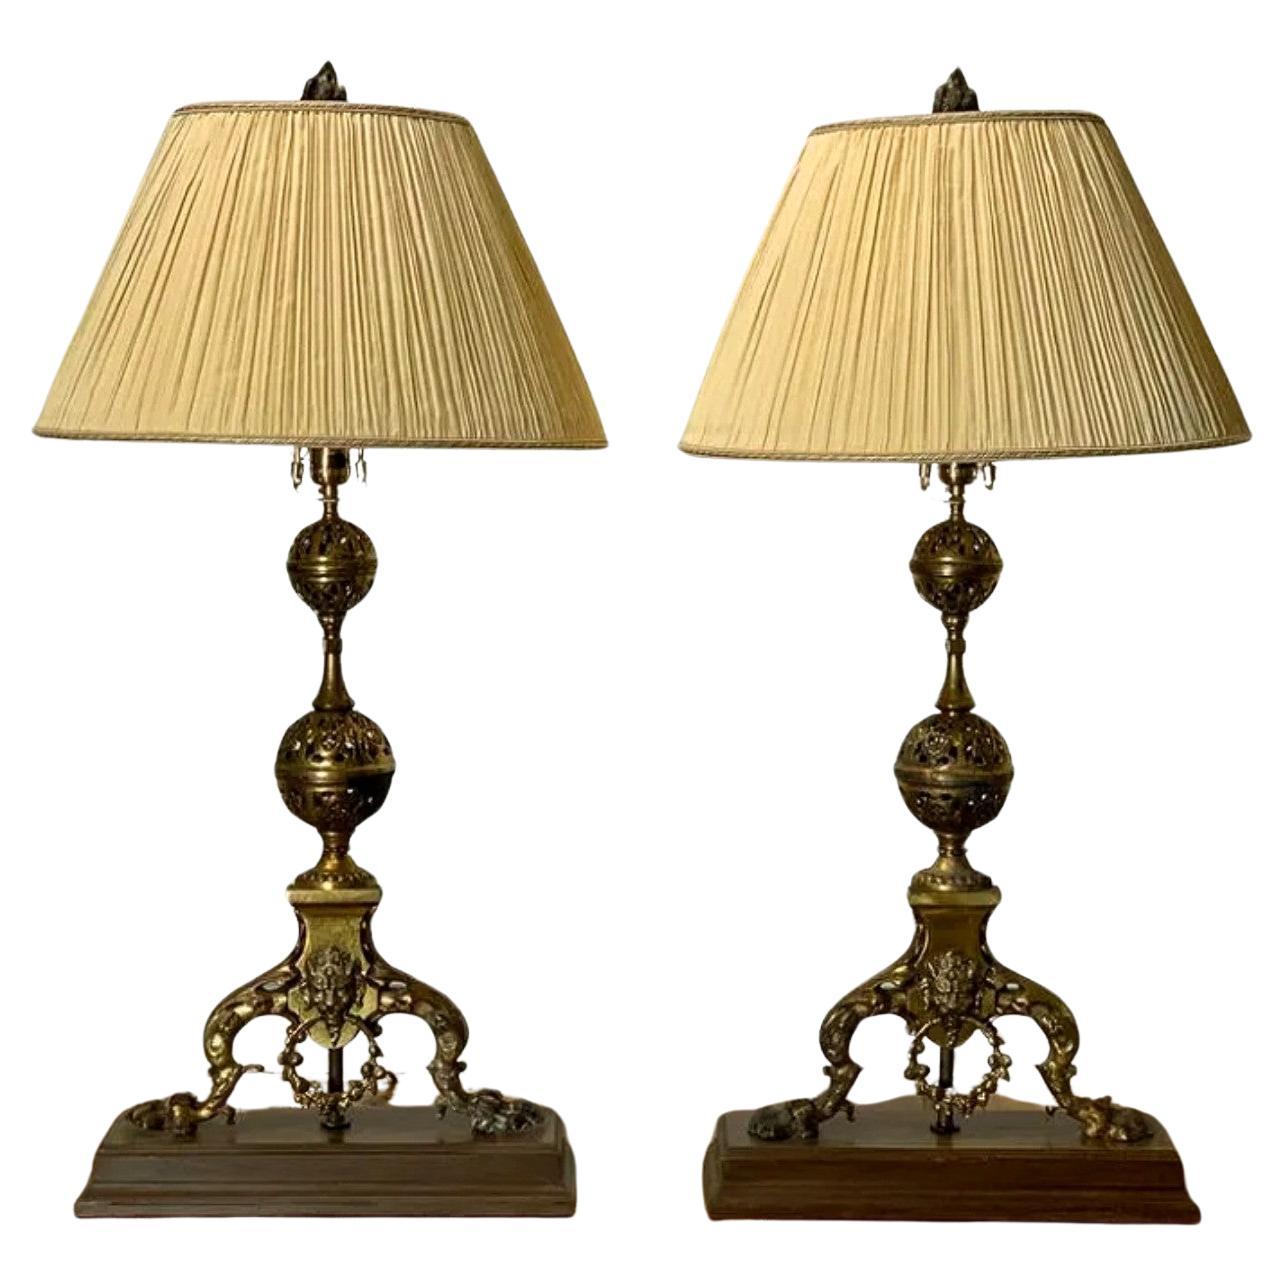 19th Century French Gothic Revival Andirons Mounted As Table Lamps - A Pair  For Sale